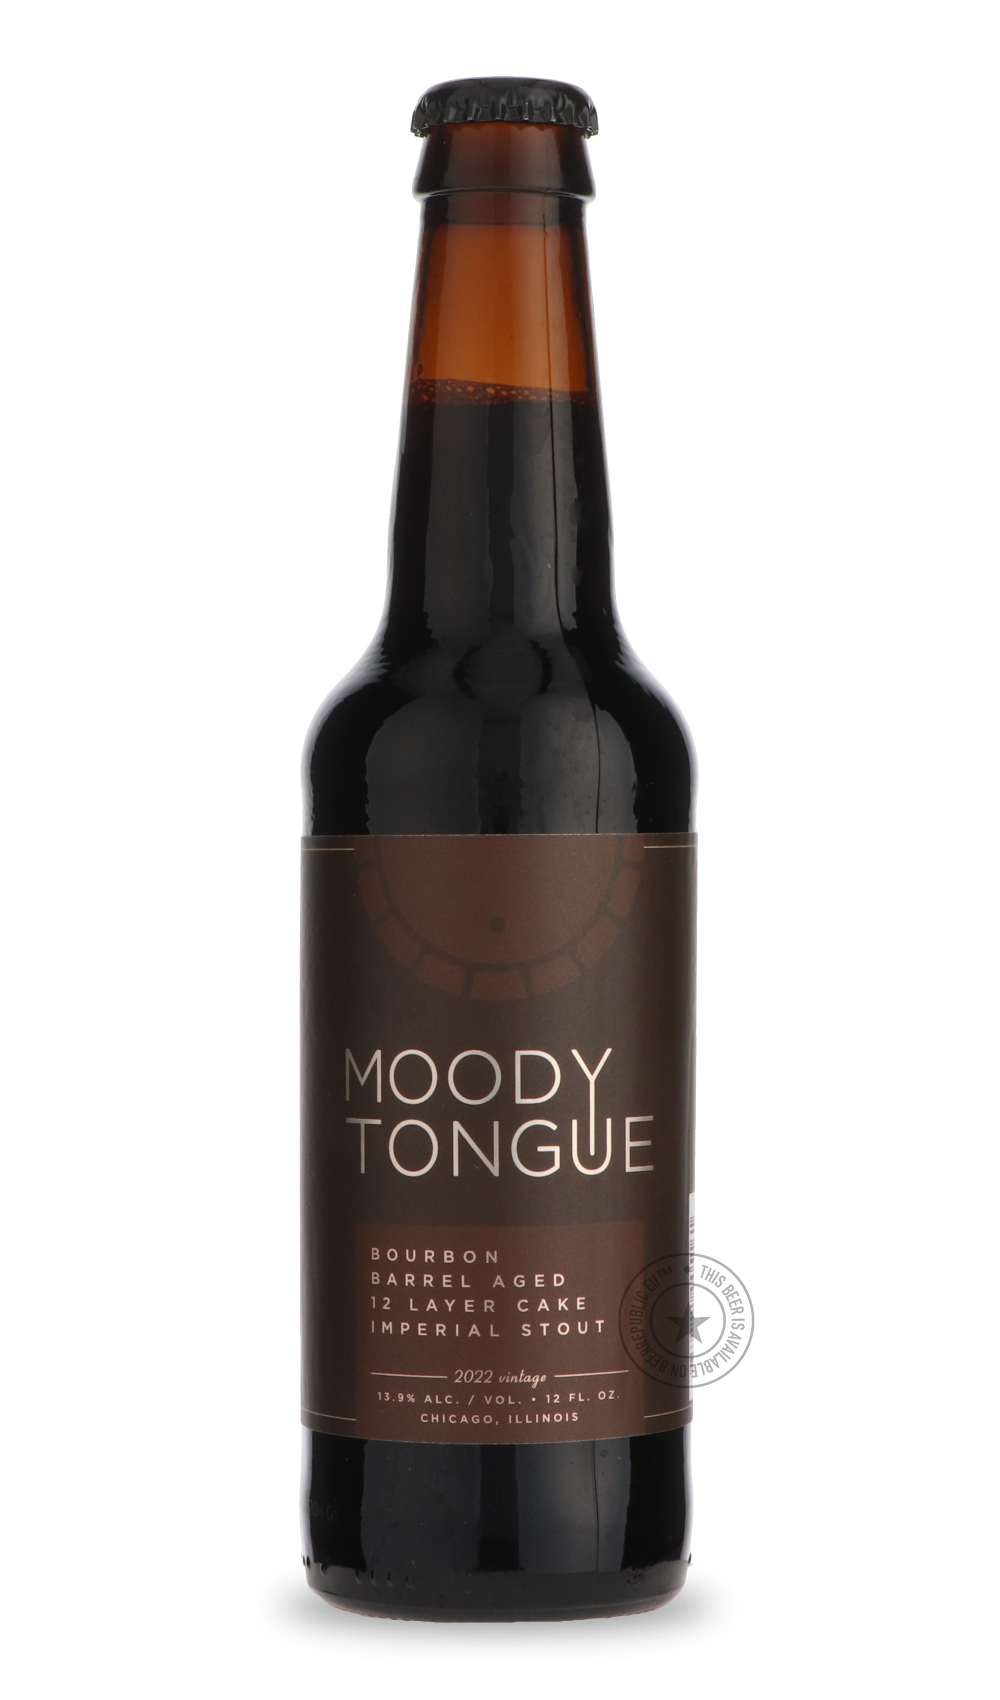 -Moody Tongue- Bourbon Barrel Aged 12 Layer Cake-Stout & Porter- Only @ Beer Republic - The best online beer store for American & Canadian craft beer - Buy beer online from the USA and Canada - Bier online kopen - Amerikaans bier kopen - Craft beer store - Craft beer kopen - Amerikanisch bier kaufen - Bier online kaufen - Acheter biere online - IPA - Stout - Porter - New England IPA - Hazy IPA - Imperial Stout - Barrel Aged - Barrel Aged Imperial Stout - Brown - Dark beer - Blond - Blonde - Pilsner - Lager 